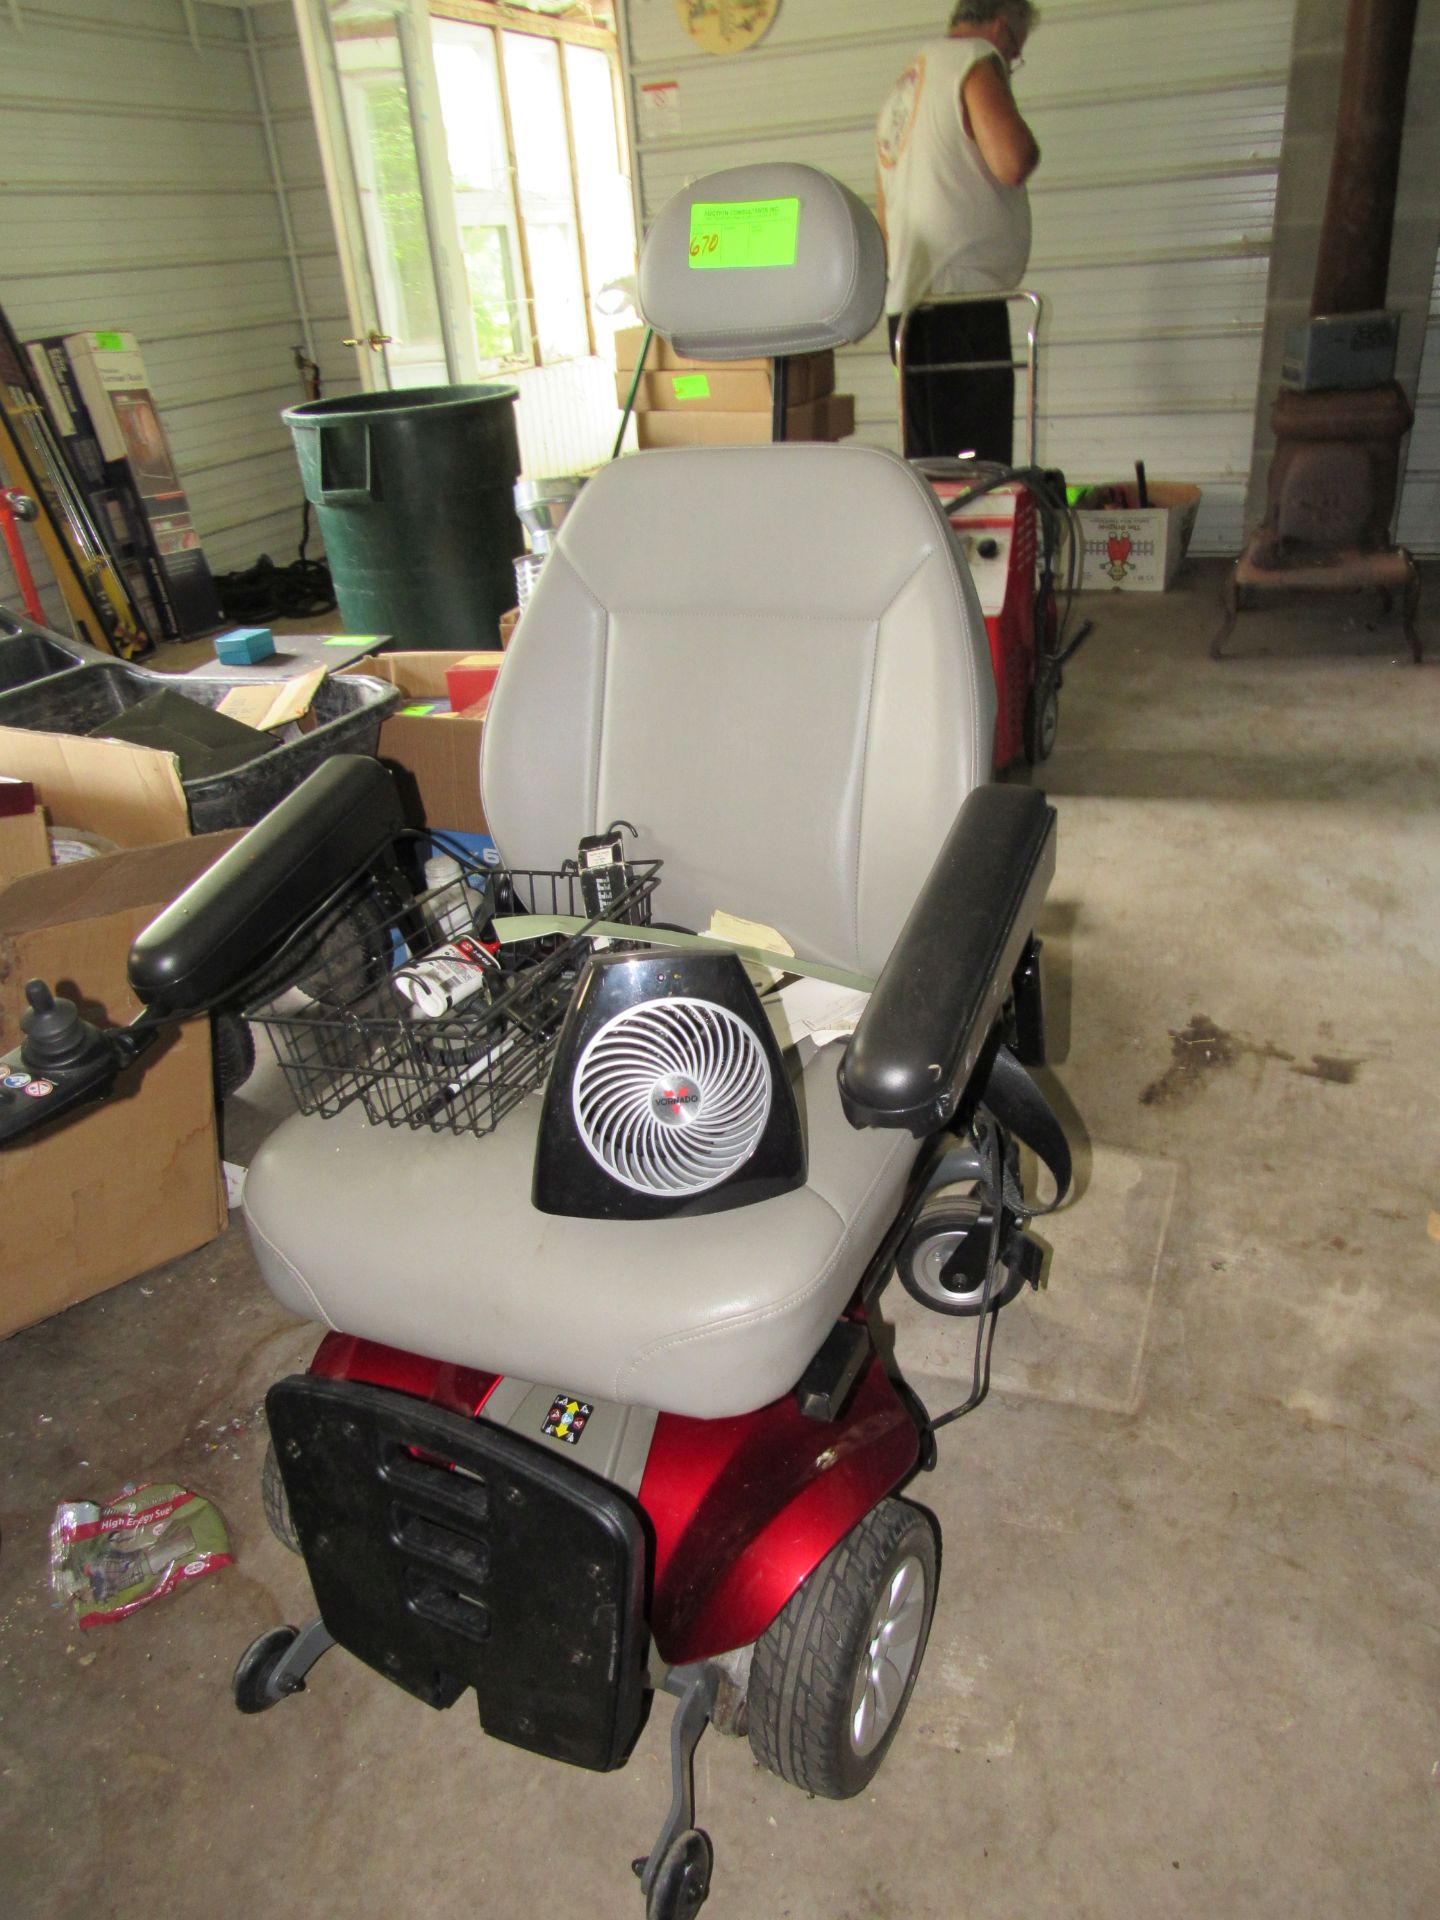 Motorized chair from the Scooter Store